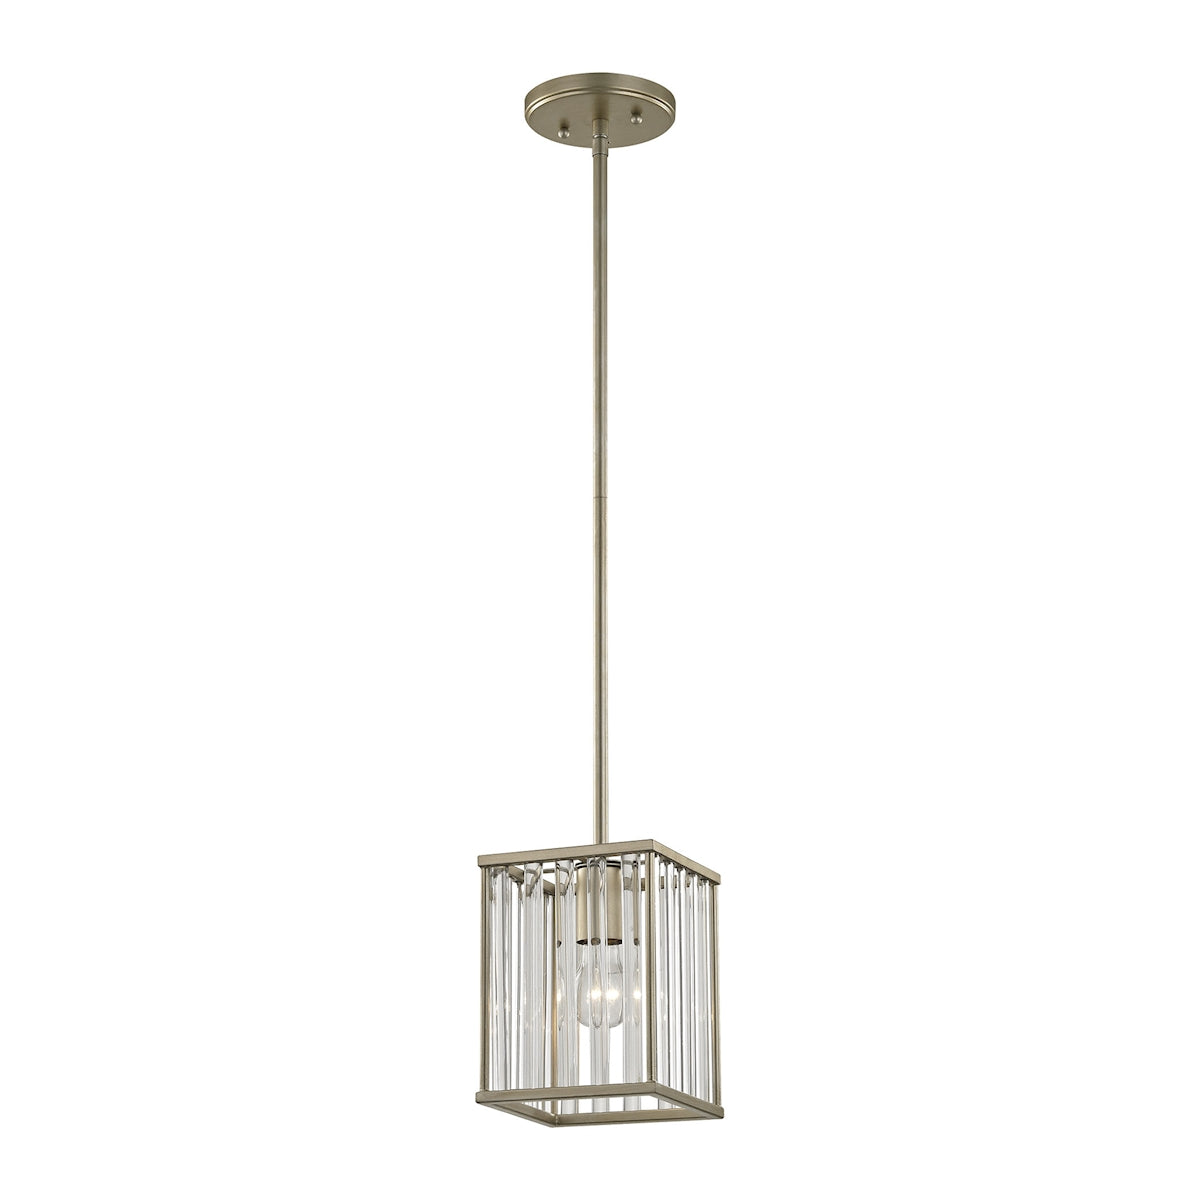 ELK Lighting 81095/1 Ridley 1-Light Mini Pendant in Aged Silver with Oval Glass Rods